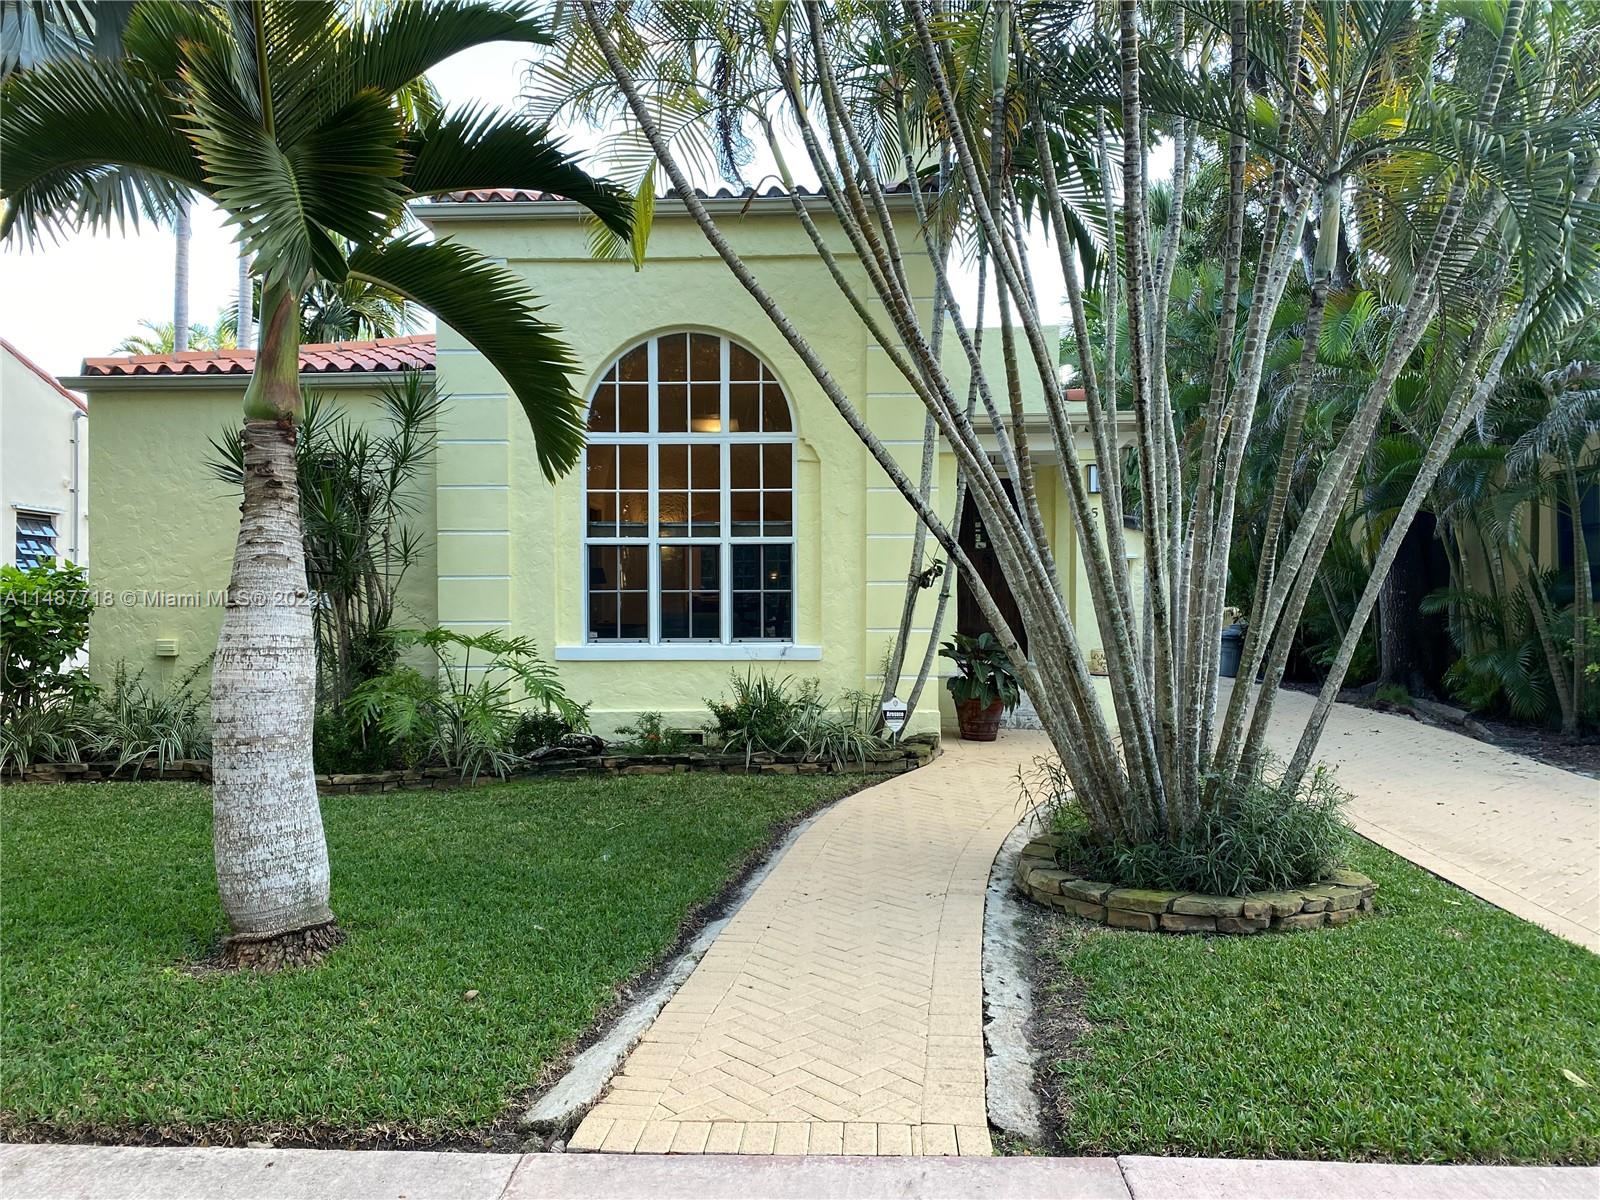 PLEASE READ. Charming Coral Gables home on a quiet street, ready to move in. Completely furnished with a good sense of style. Updated kitchen and bathrooms with stainless steel appliances. The entire house is available but one room is used as storage. Property will be occupied by the owners from December 16- January 11. The rest of the year you can enjoy it for yourself. Property can be rented yearly with some conditions. Call the agent for more details. Furniture must stay. Preferably 1 person. If 2 tenants rent will be 100 more. Tenant pays for all utilities.